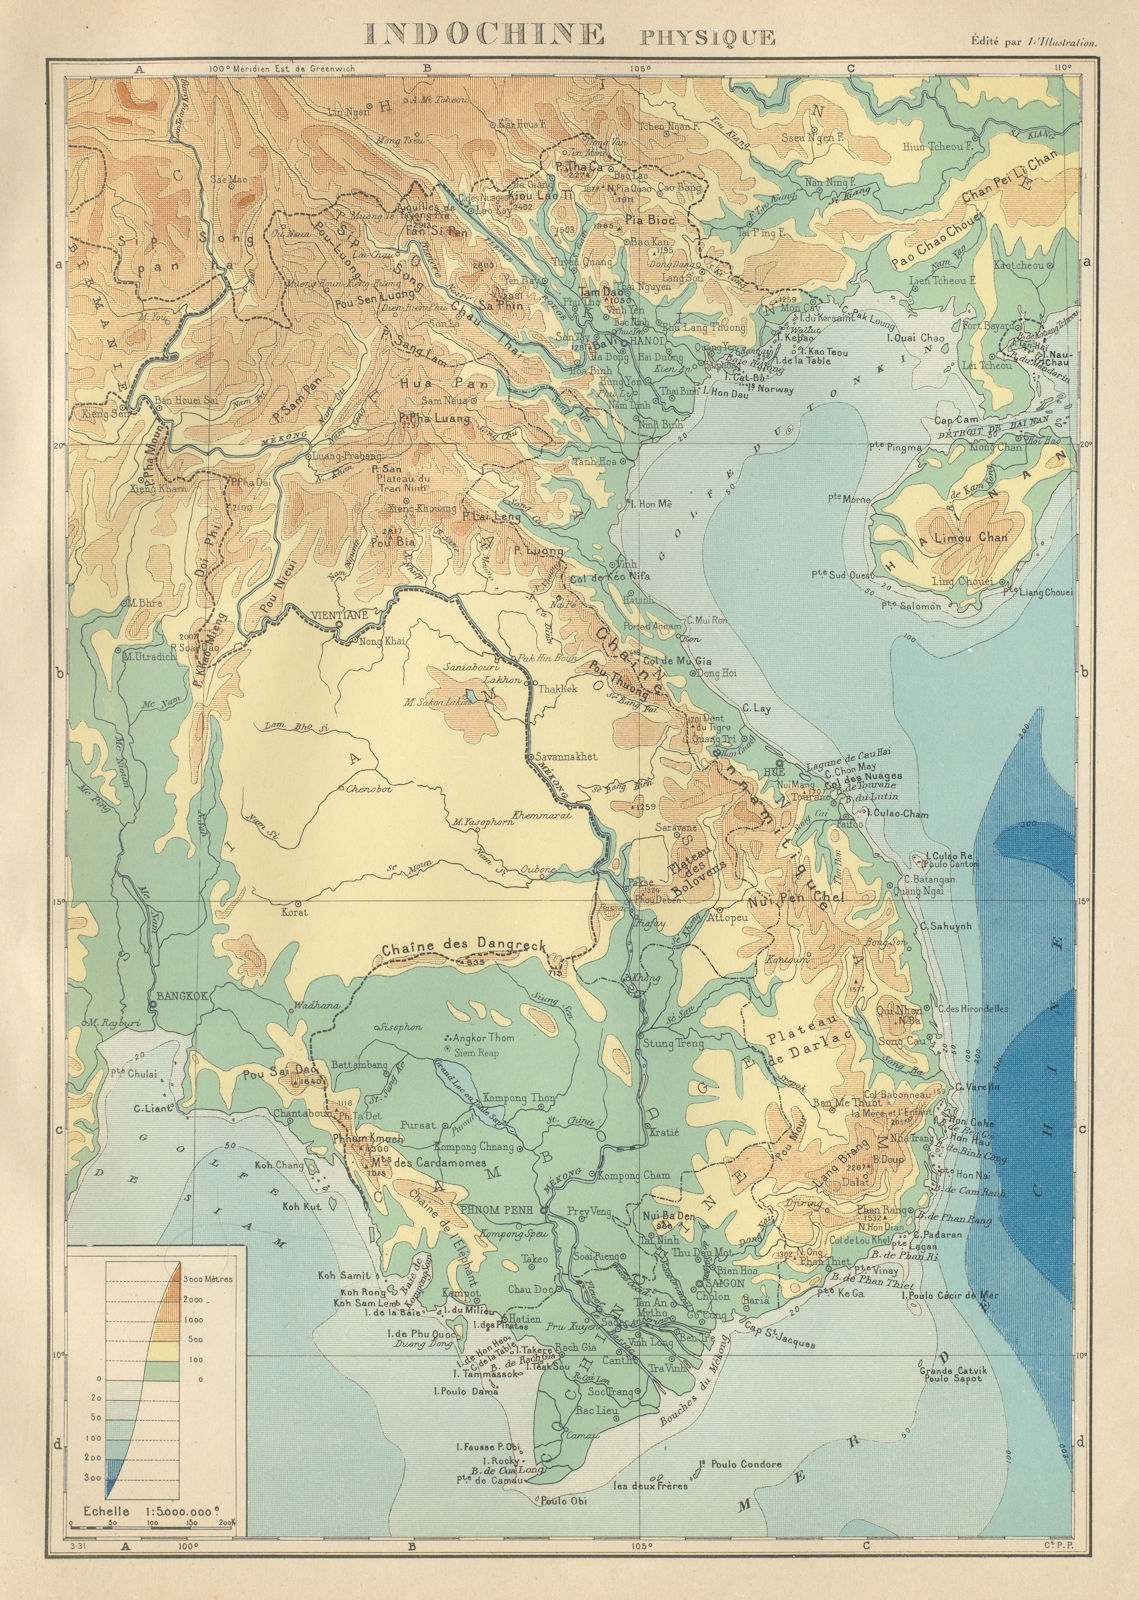 Associate Product COLONIAL FRENCH INDOCHINA. Indochine française. Physique. Physical 1931 map